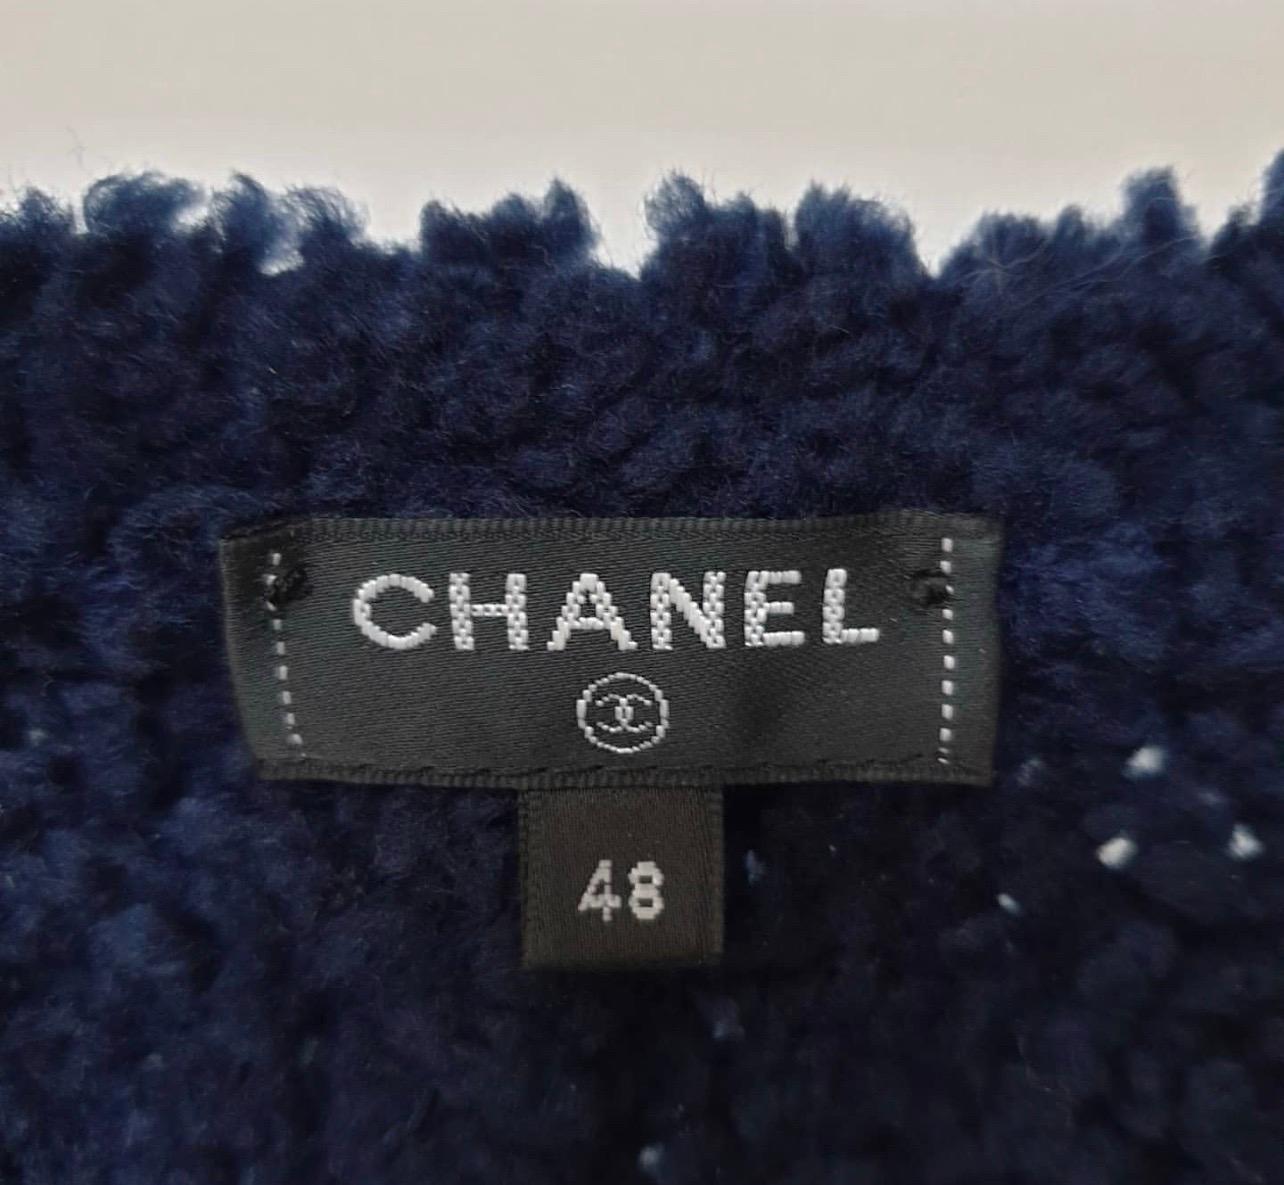 Chanel 19K Fall  Winter  CC Coco  Sweater
Navy Wool. 
Size 48 FR. Runs smaller.
Very good condition. 
Created in 1910 by talented designer Coco Chanel, the couture fashion house, with its signature intertwined double C logo, has successfully